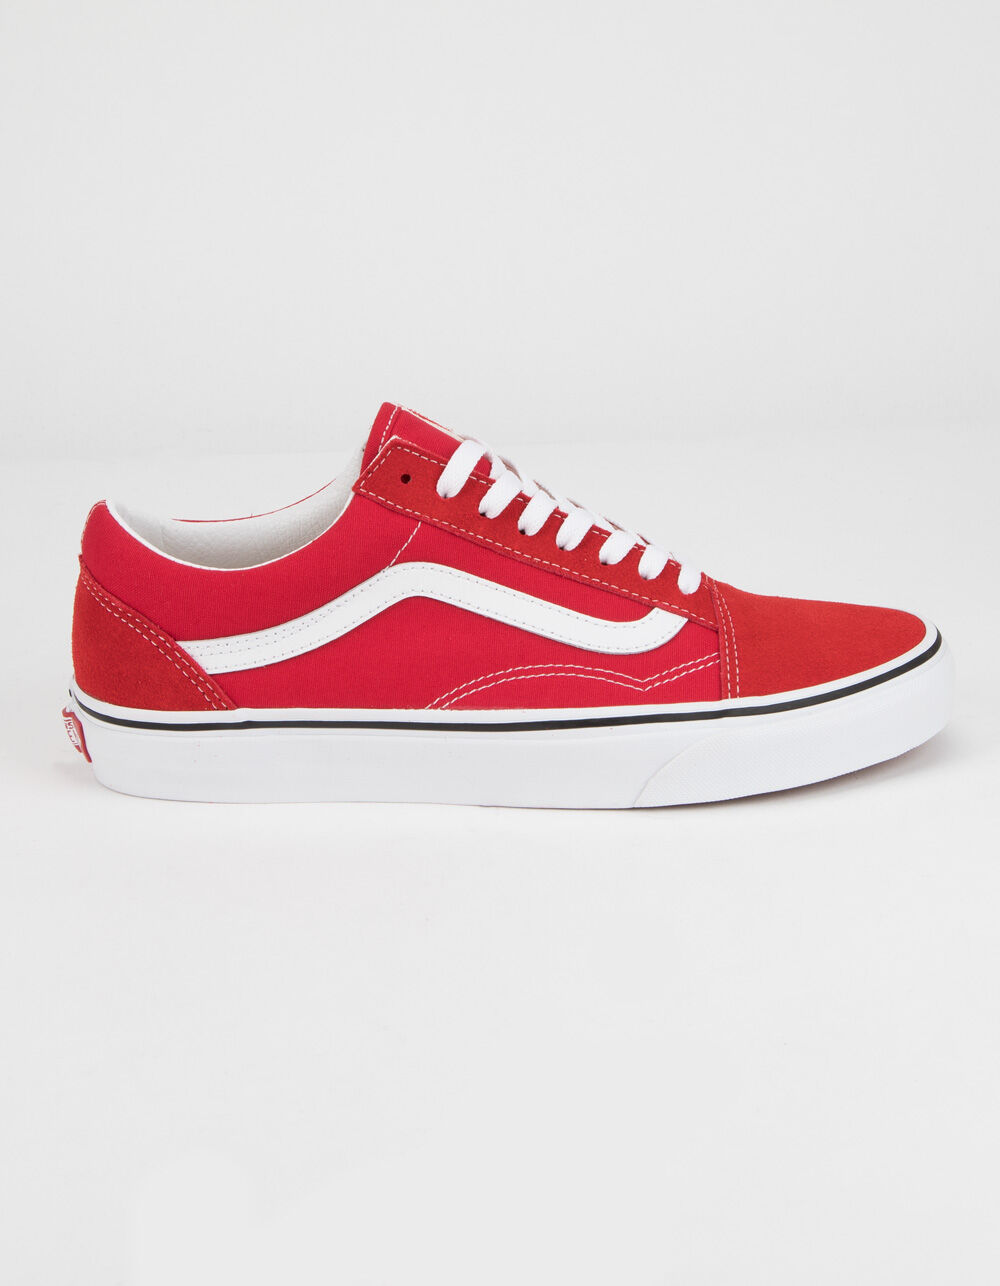 Old Skool Shoes, Red